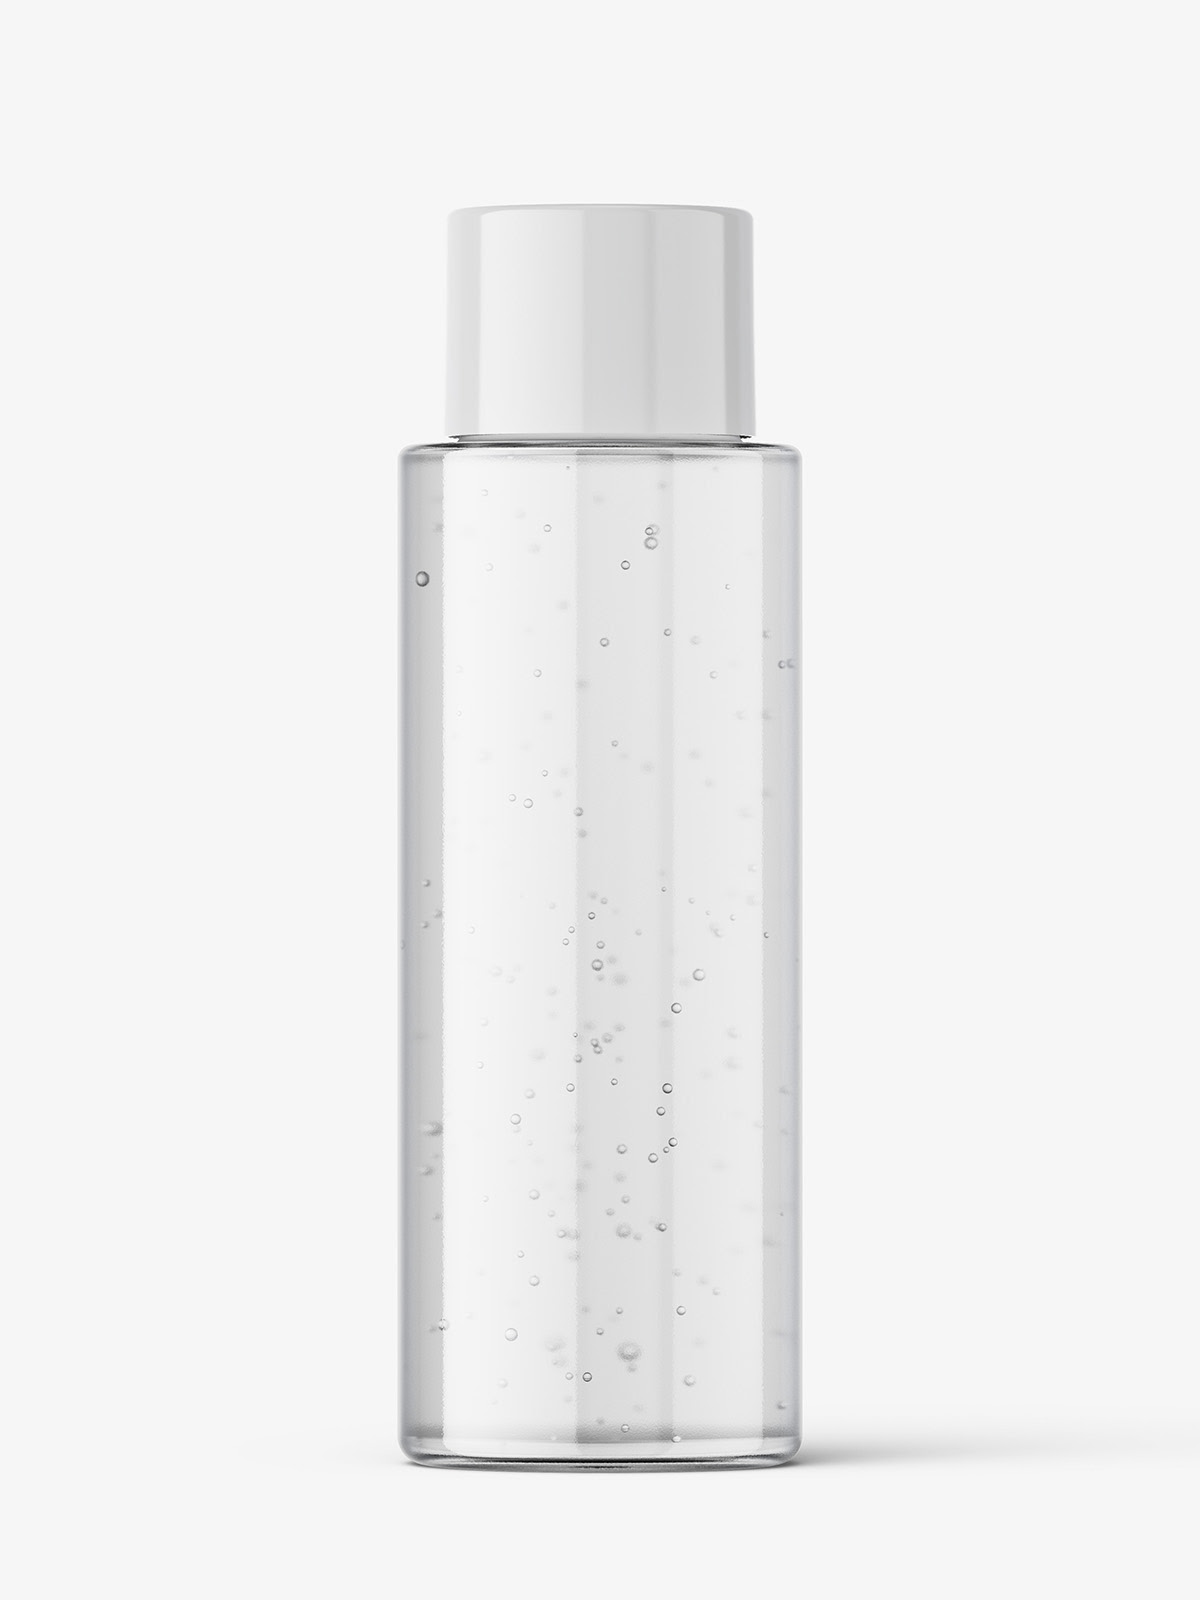 Simple cosmetic round bottle mockup / clear Smarty Mockups